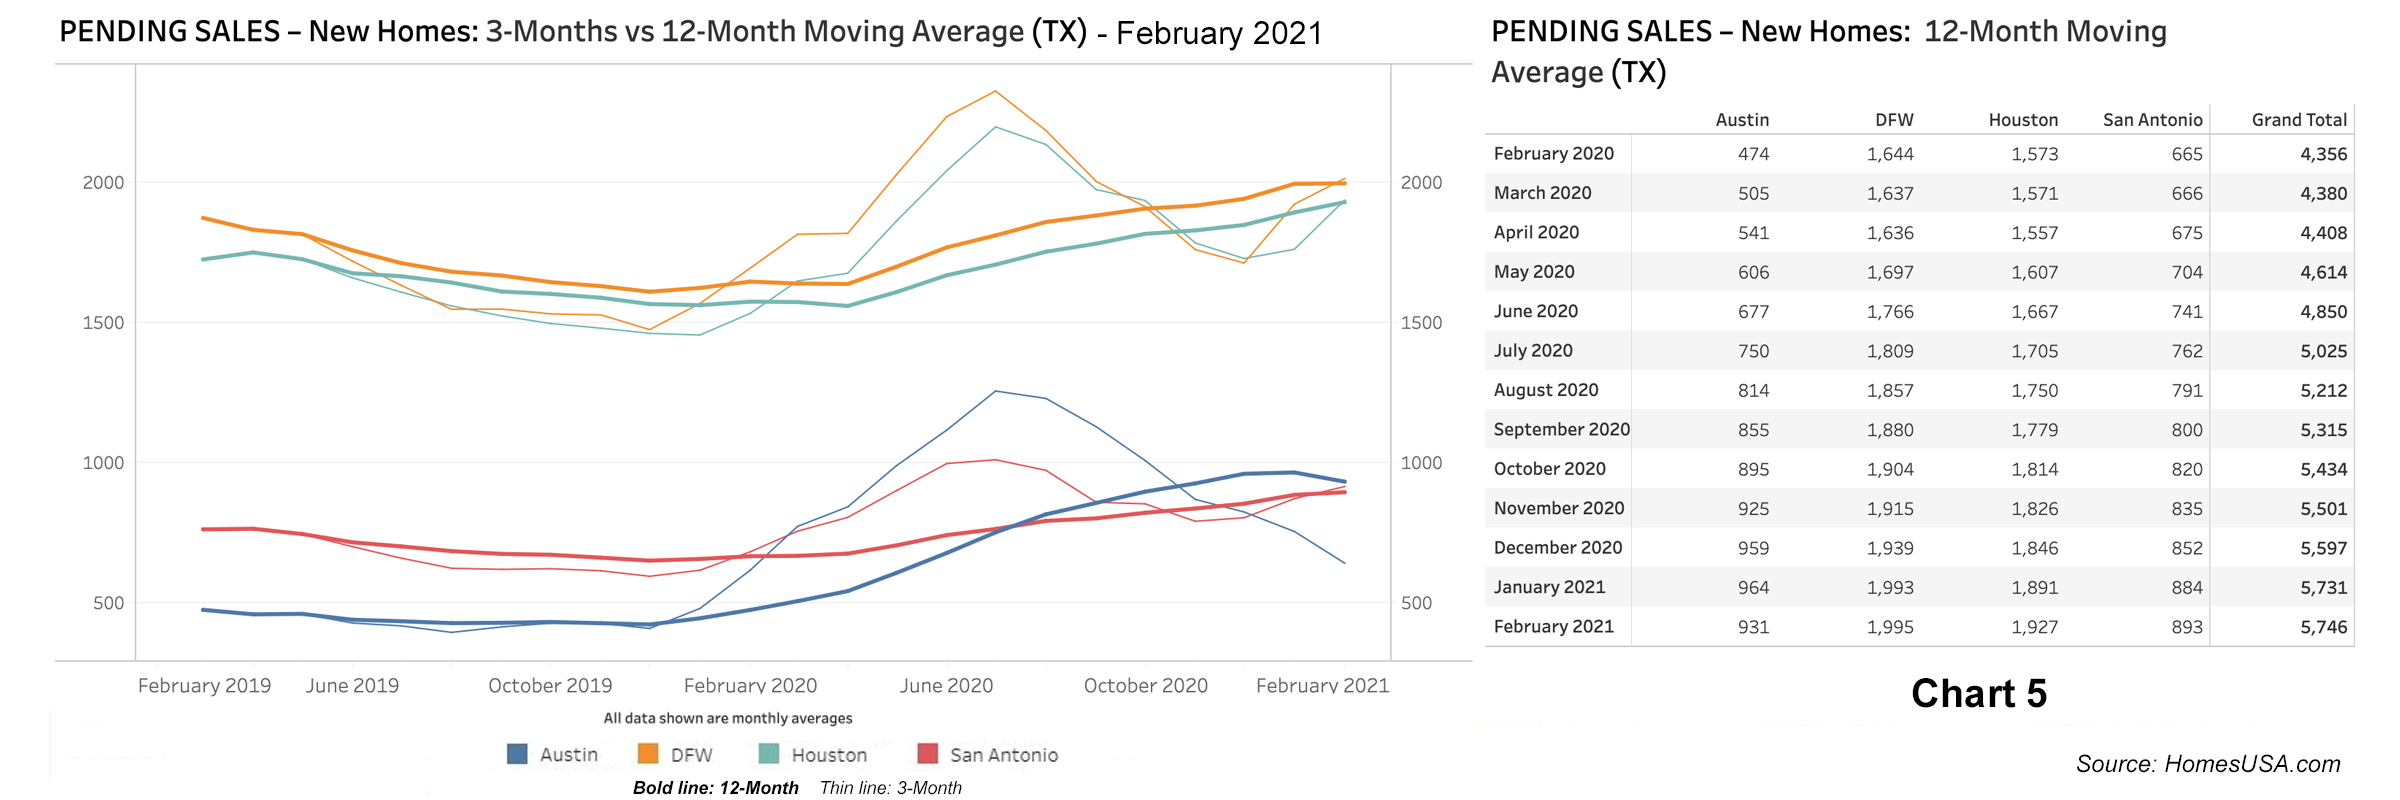 Chart 5: Texas Pending New Homes Sales - February 2021